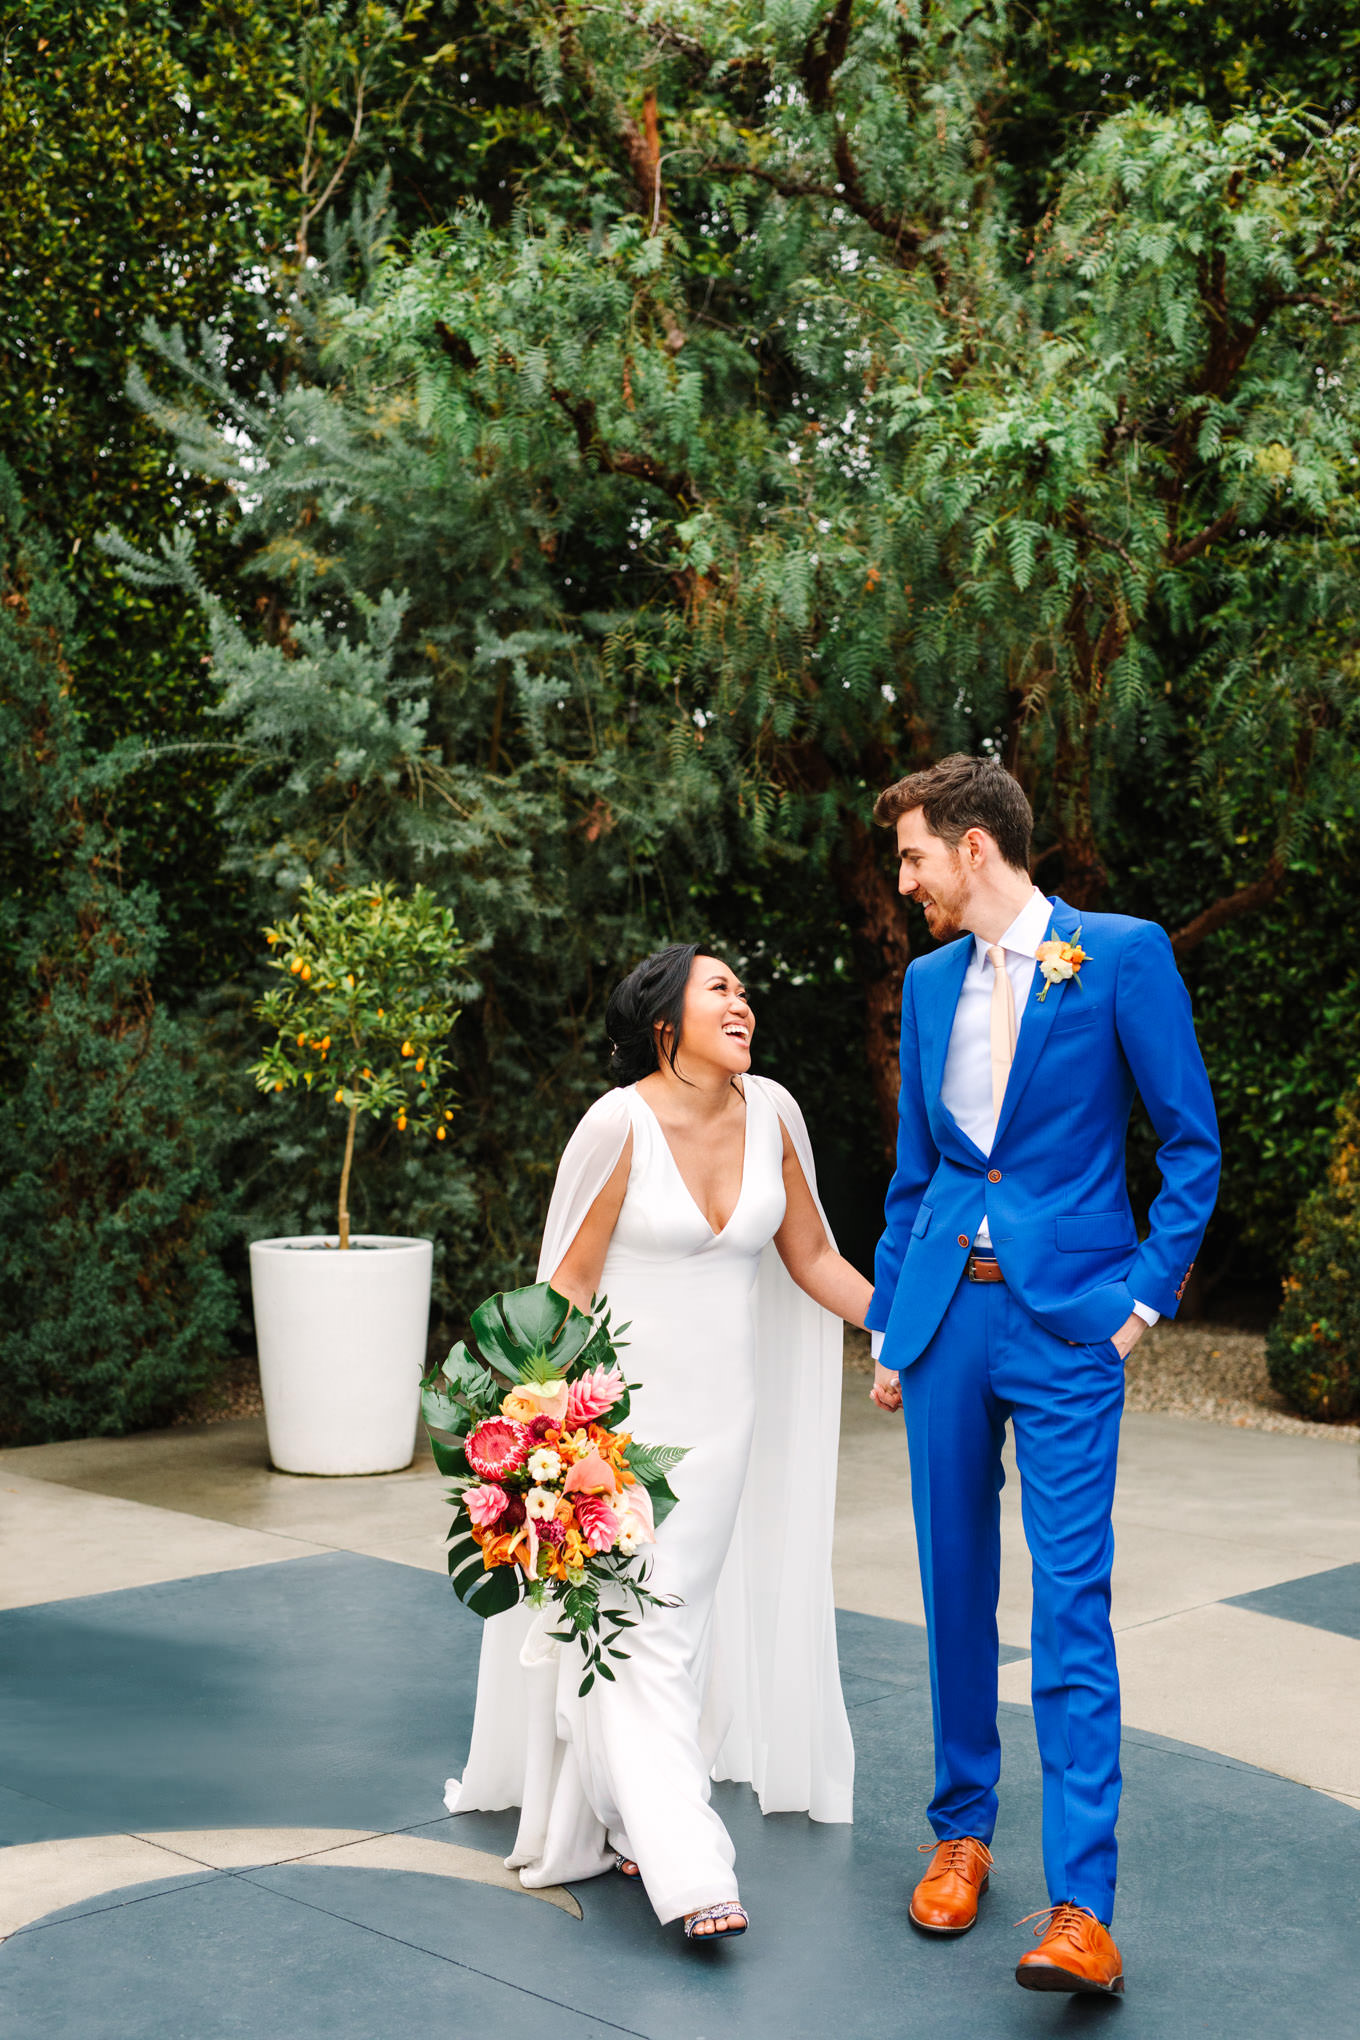 Bride in cape walking with groom in blue suit | TV inspired wedding at The Fig House Los Angeles | Published on The Knot | Fresh and colorful photography for fun-loving couples in Southern California | #losangeleswedding #TVwedding #colorfulwedding #theknot   Source: Mary Costa Photography | Los Angeles wedding photographer